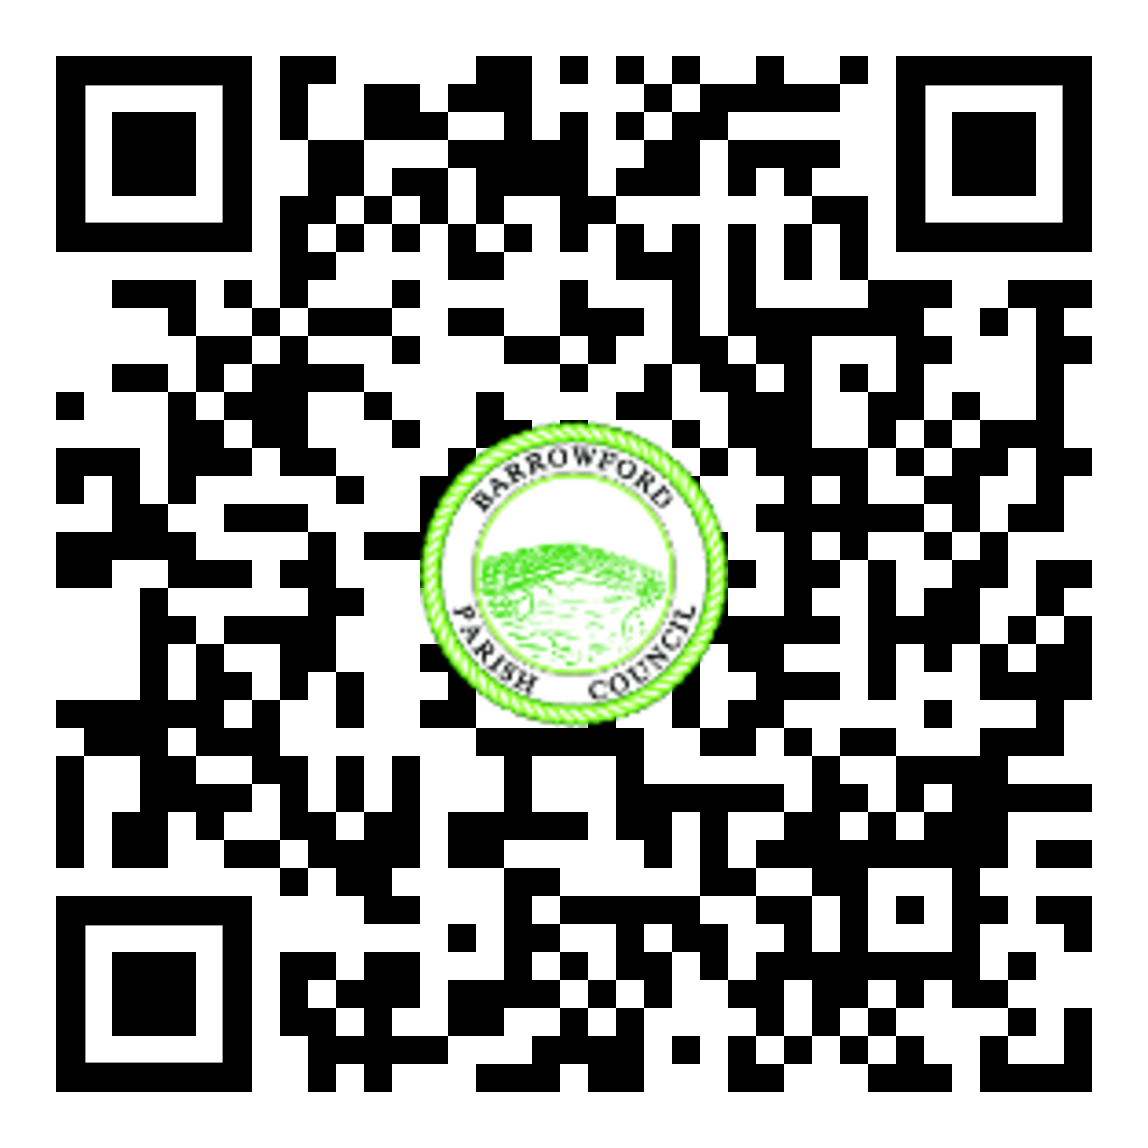 shops qr code with logo